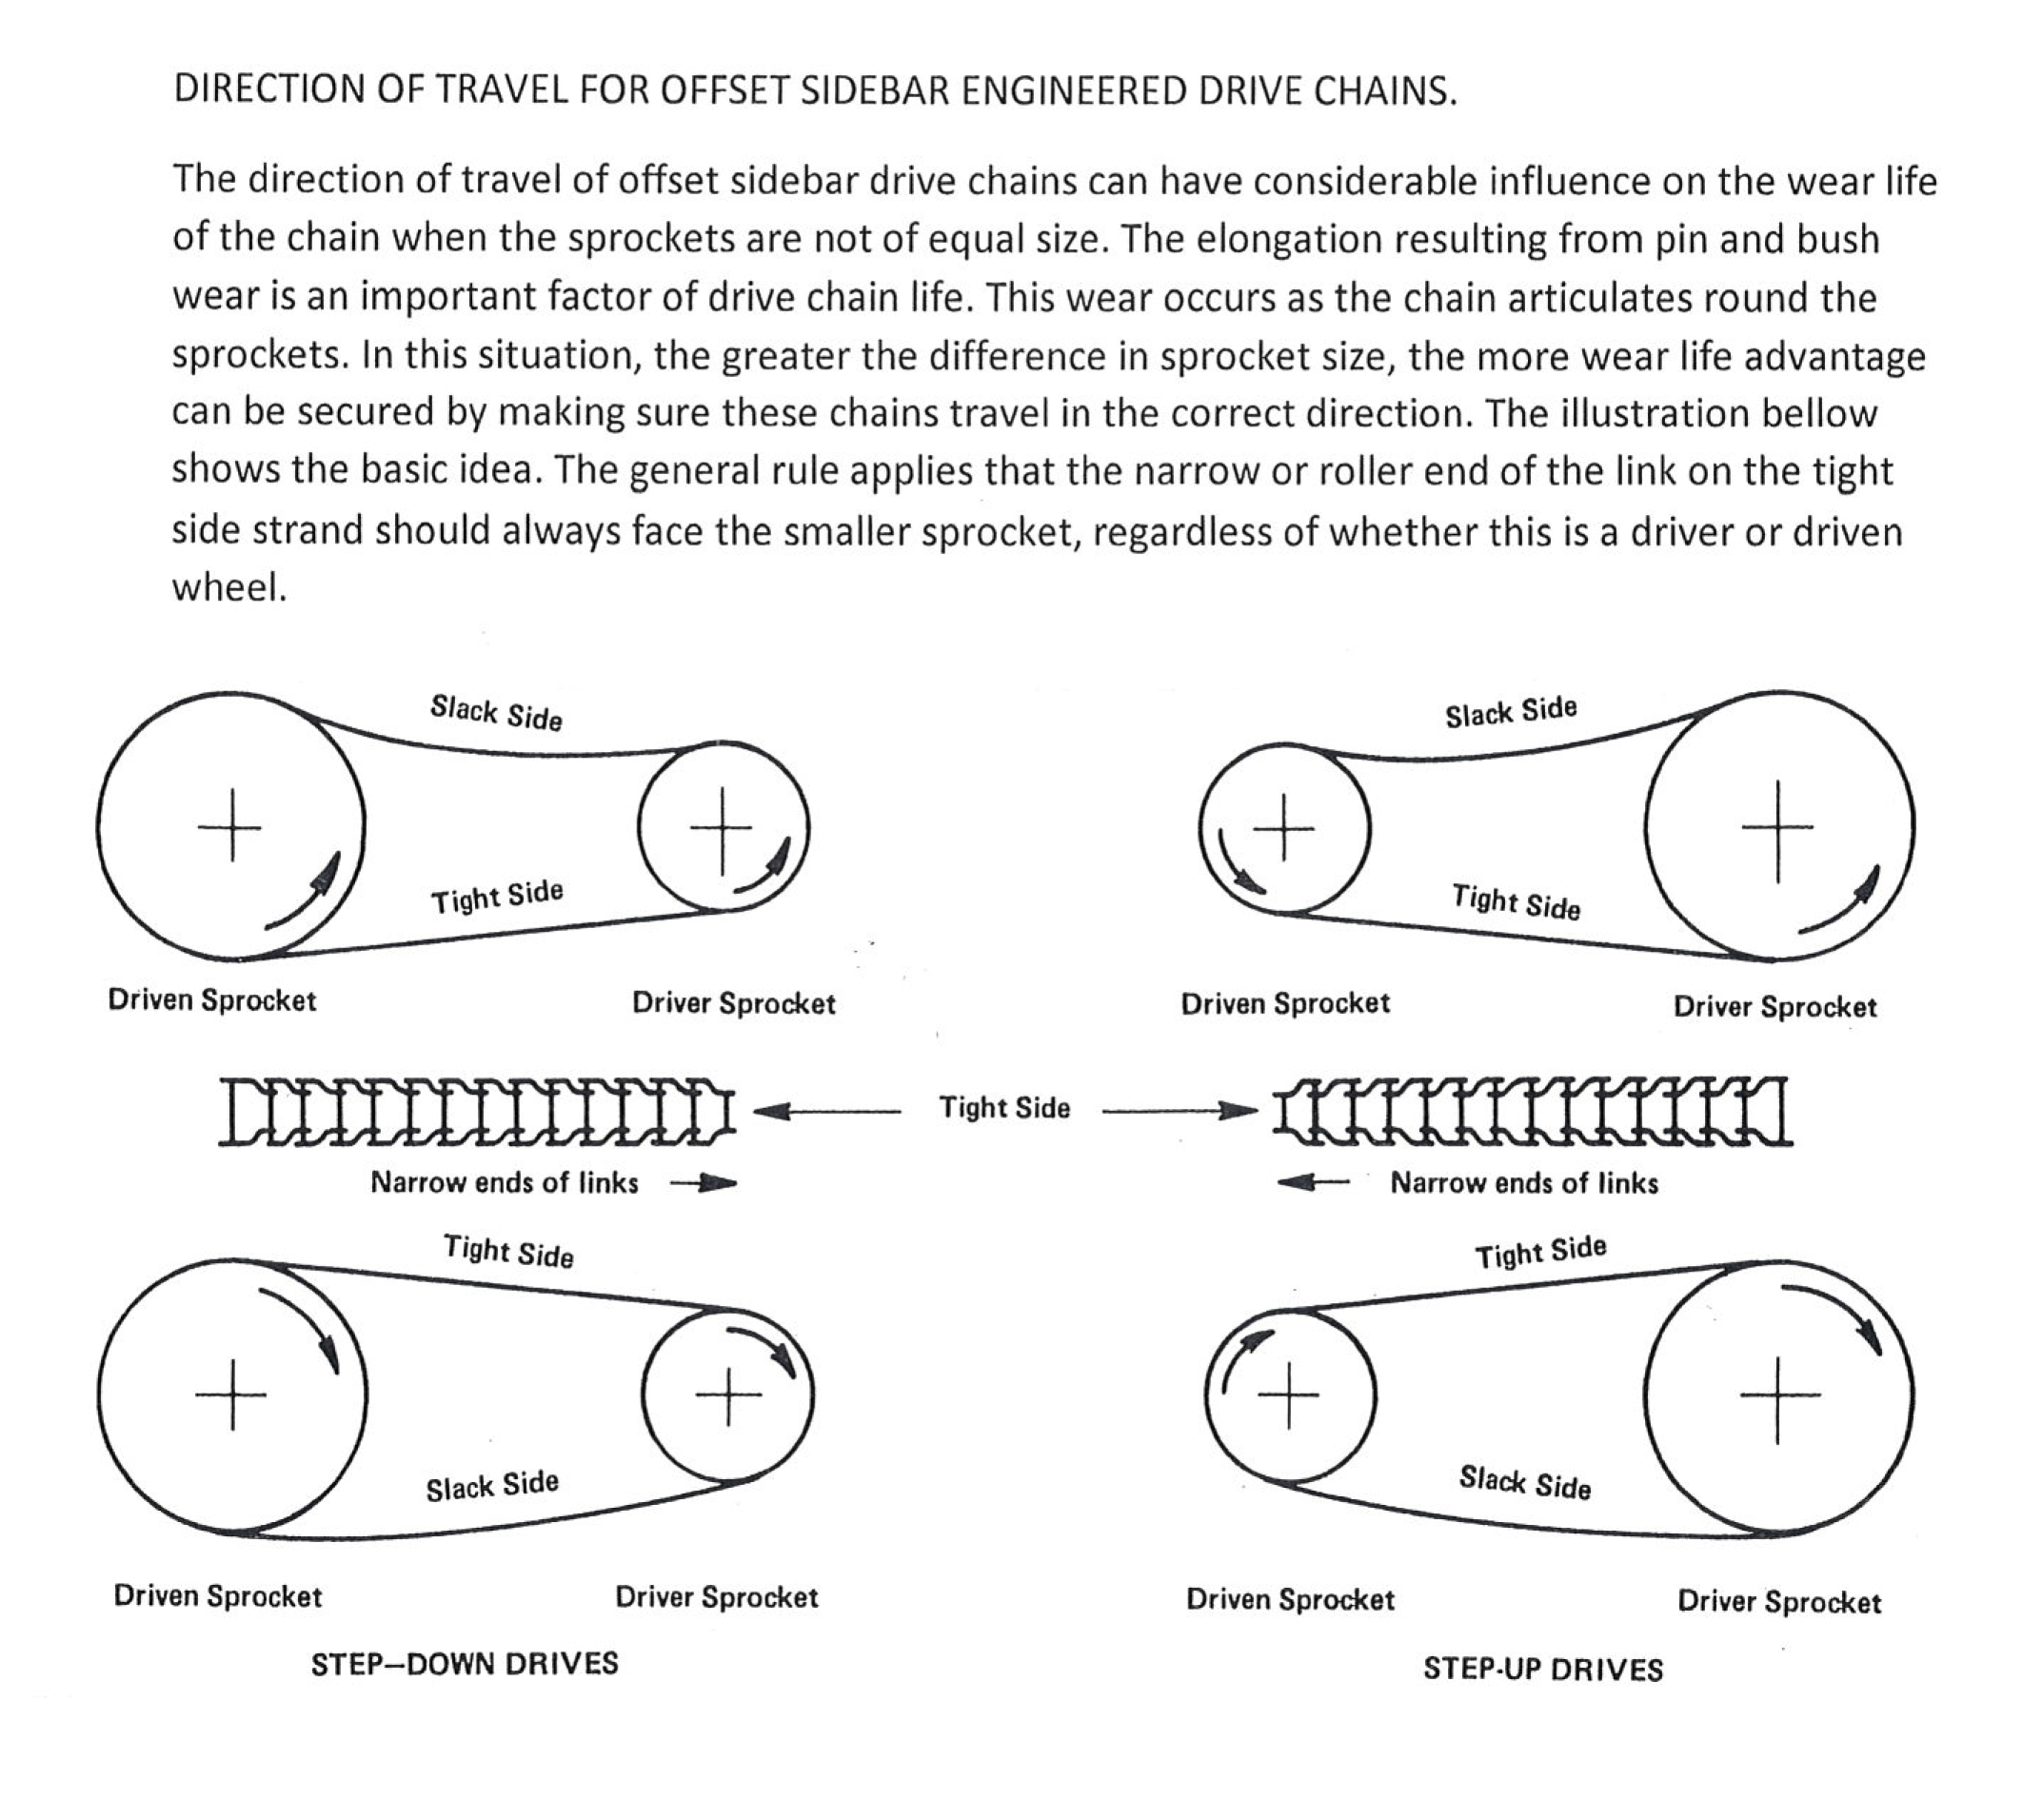 Direction of travel - drive chains